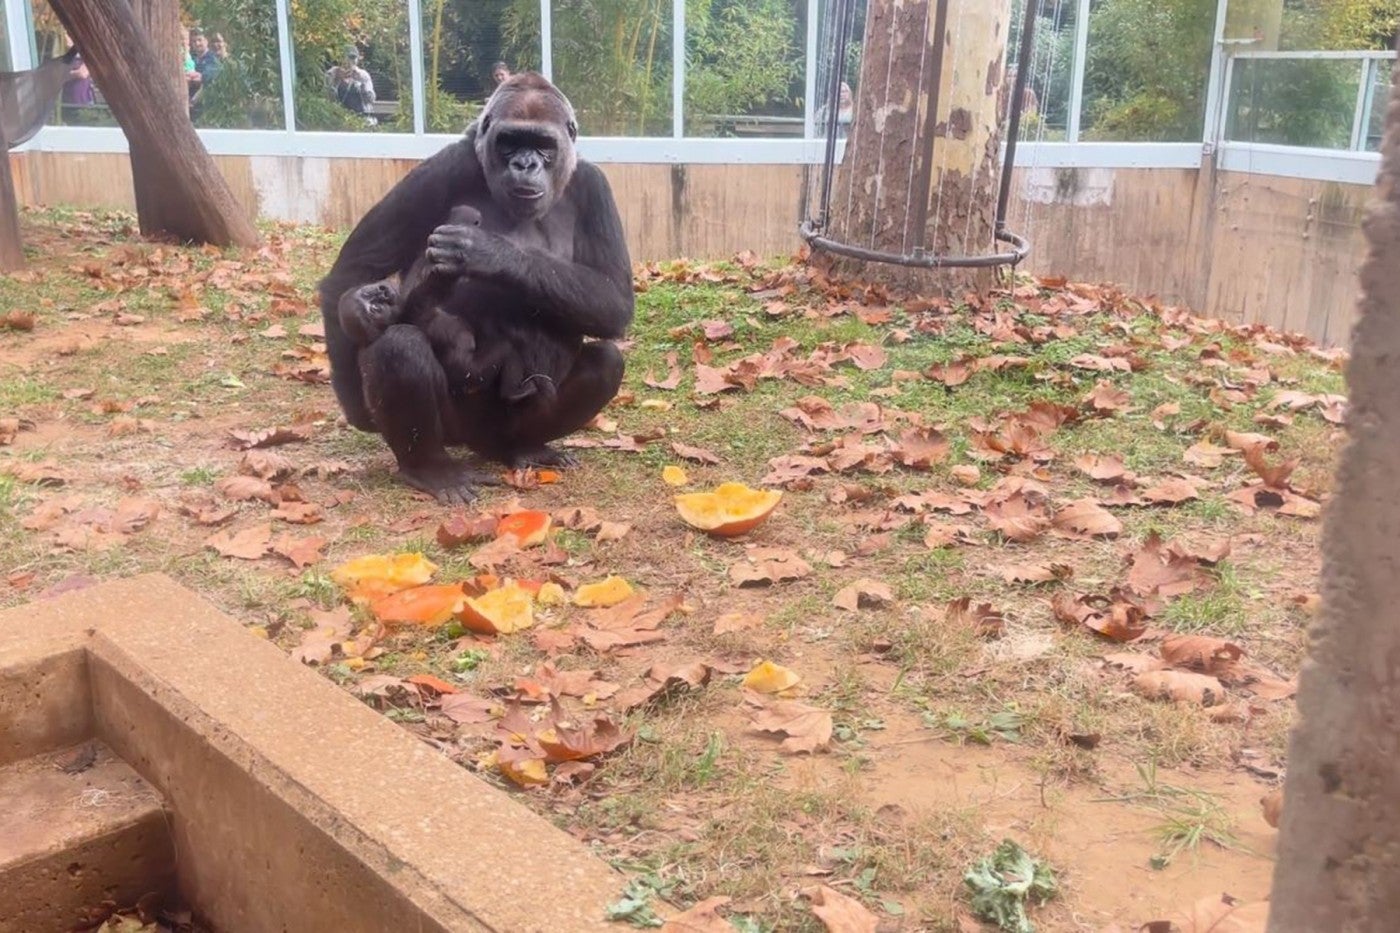 Western lowland gorilla Calaya and Zahra in the Great Ape House's outdoor habitat. Calaya is eating pieces of pumpkin.